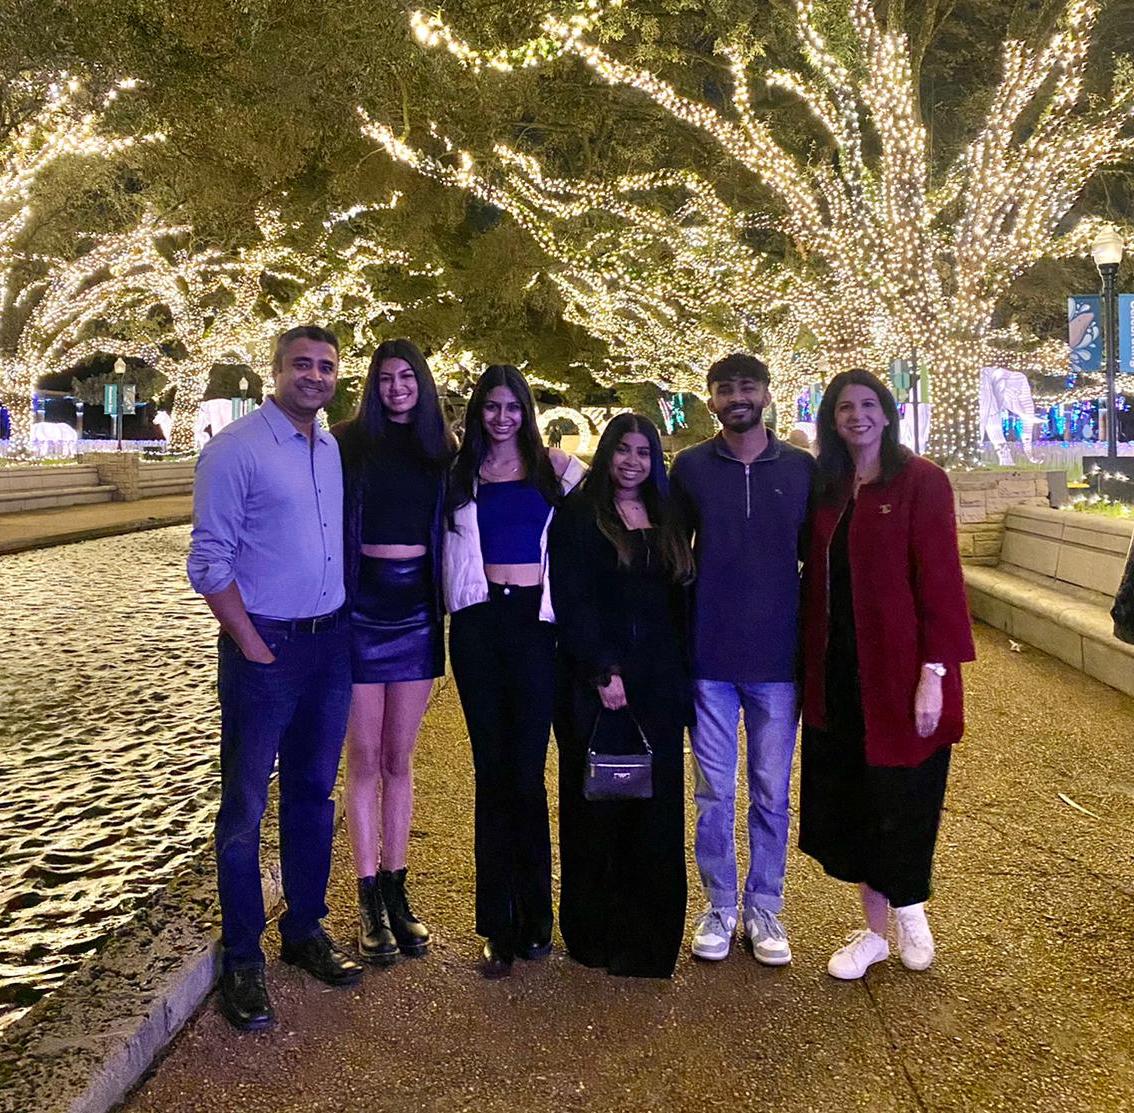 A group photo with 6 people and a trail of trees decorated with white lights in the background.